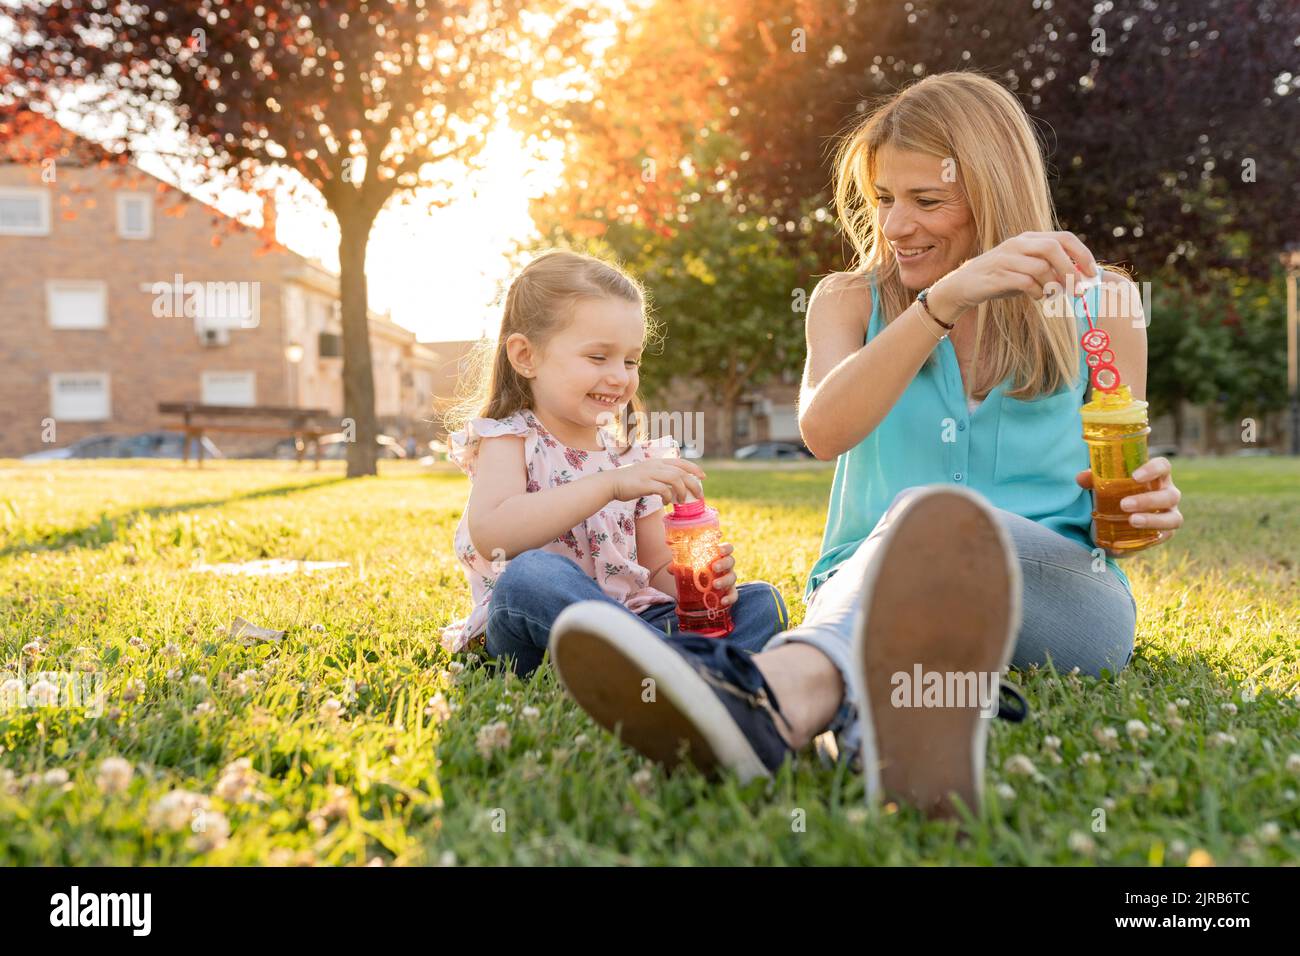 Smiling mother and daughter dipping bubble wands in bottles at park Stock Photo